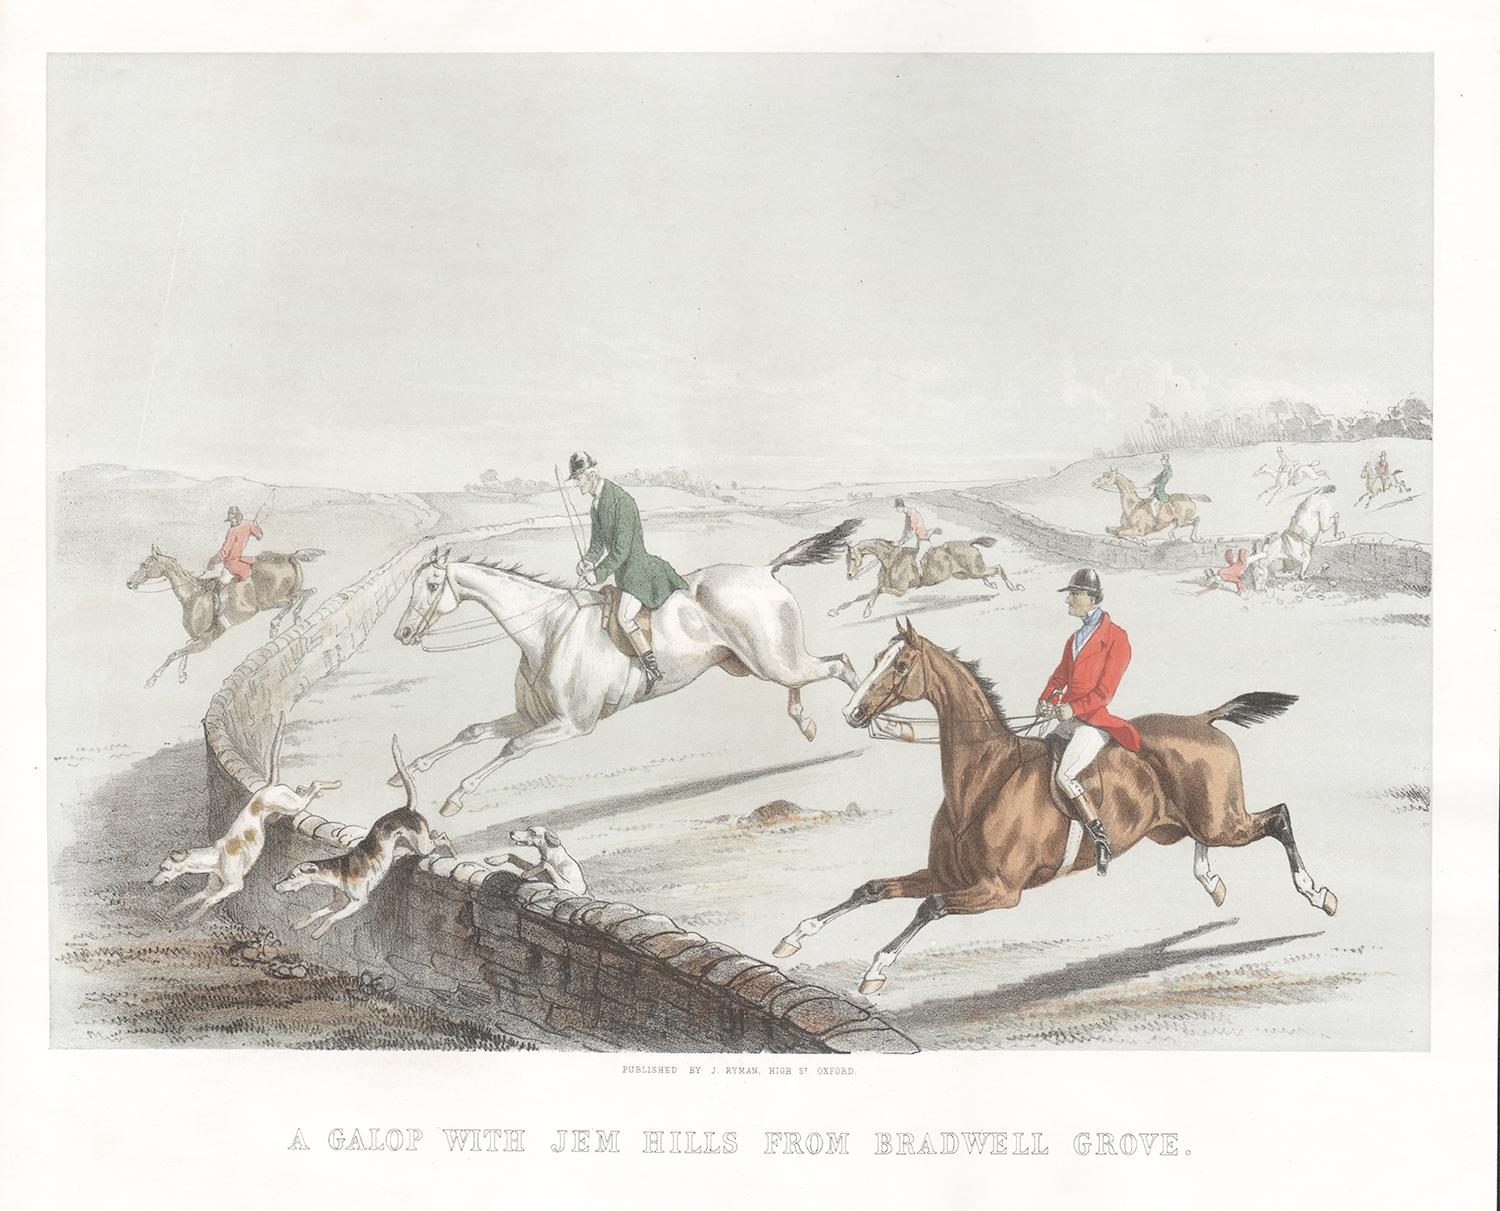 Unknown Figurative Print - A Galop with Jem Hills from Bradwell Grove, English hunting lithograph, c1850